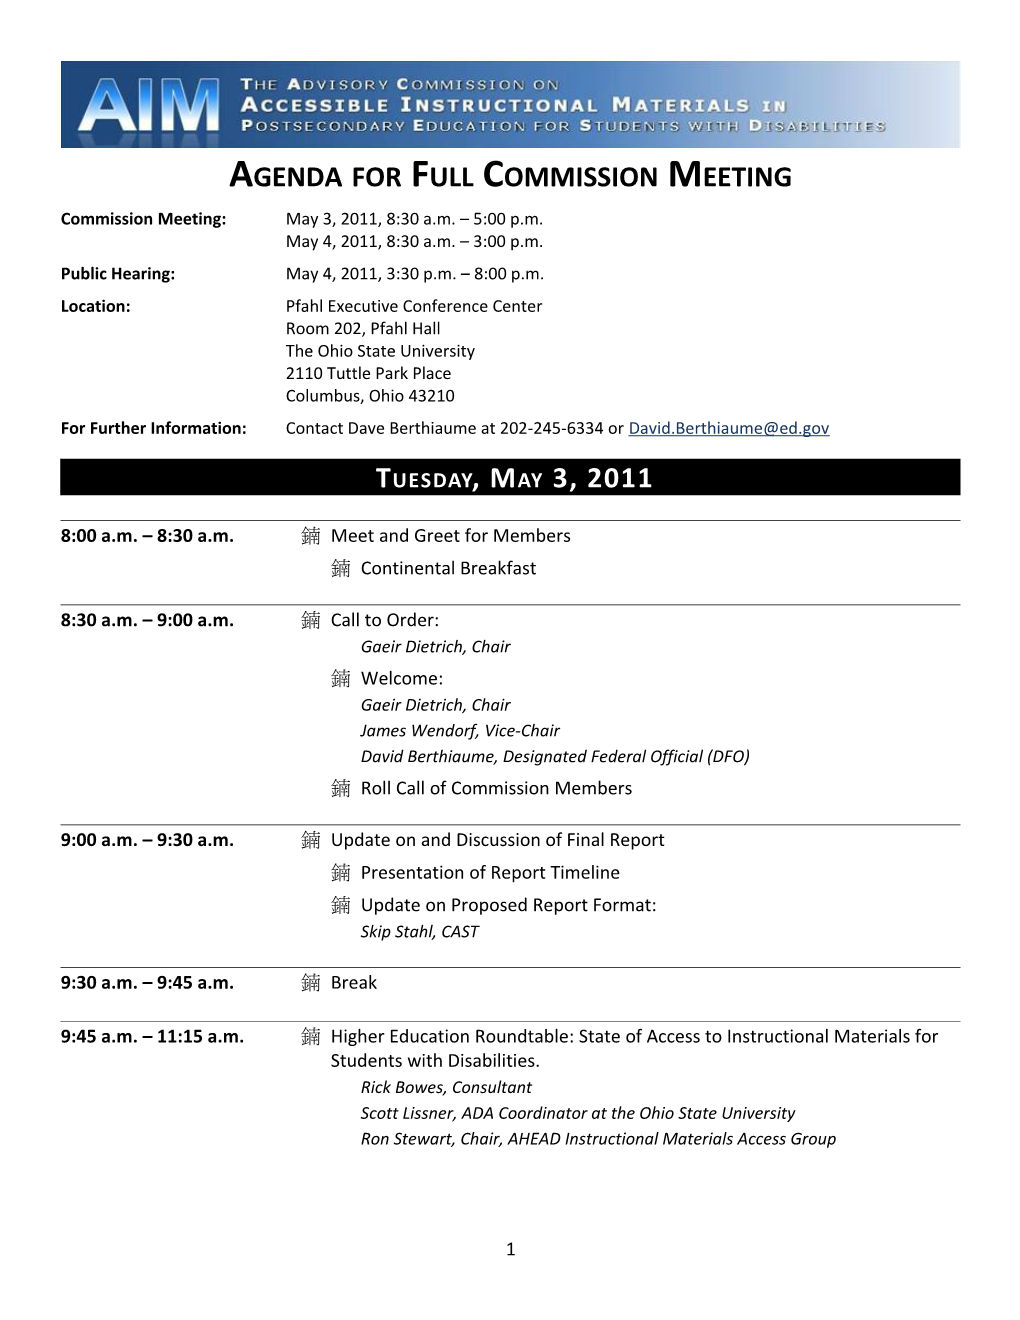 Agenda for Full Commission Meeting, Columbus, Ohio. May 4-5, 2011 (MS Word)